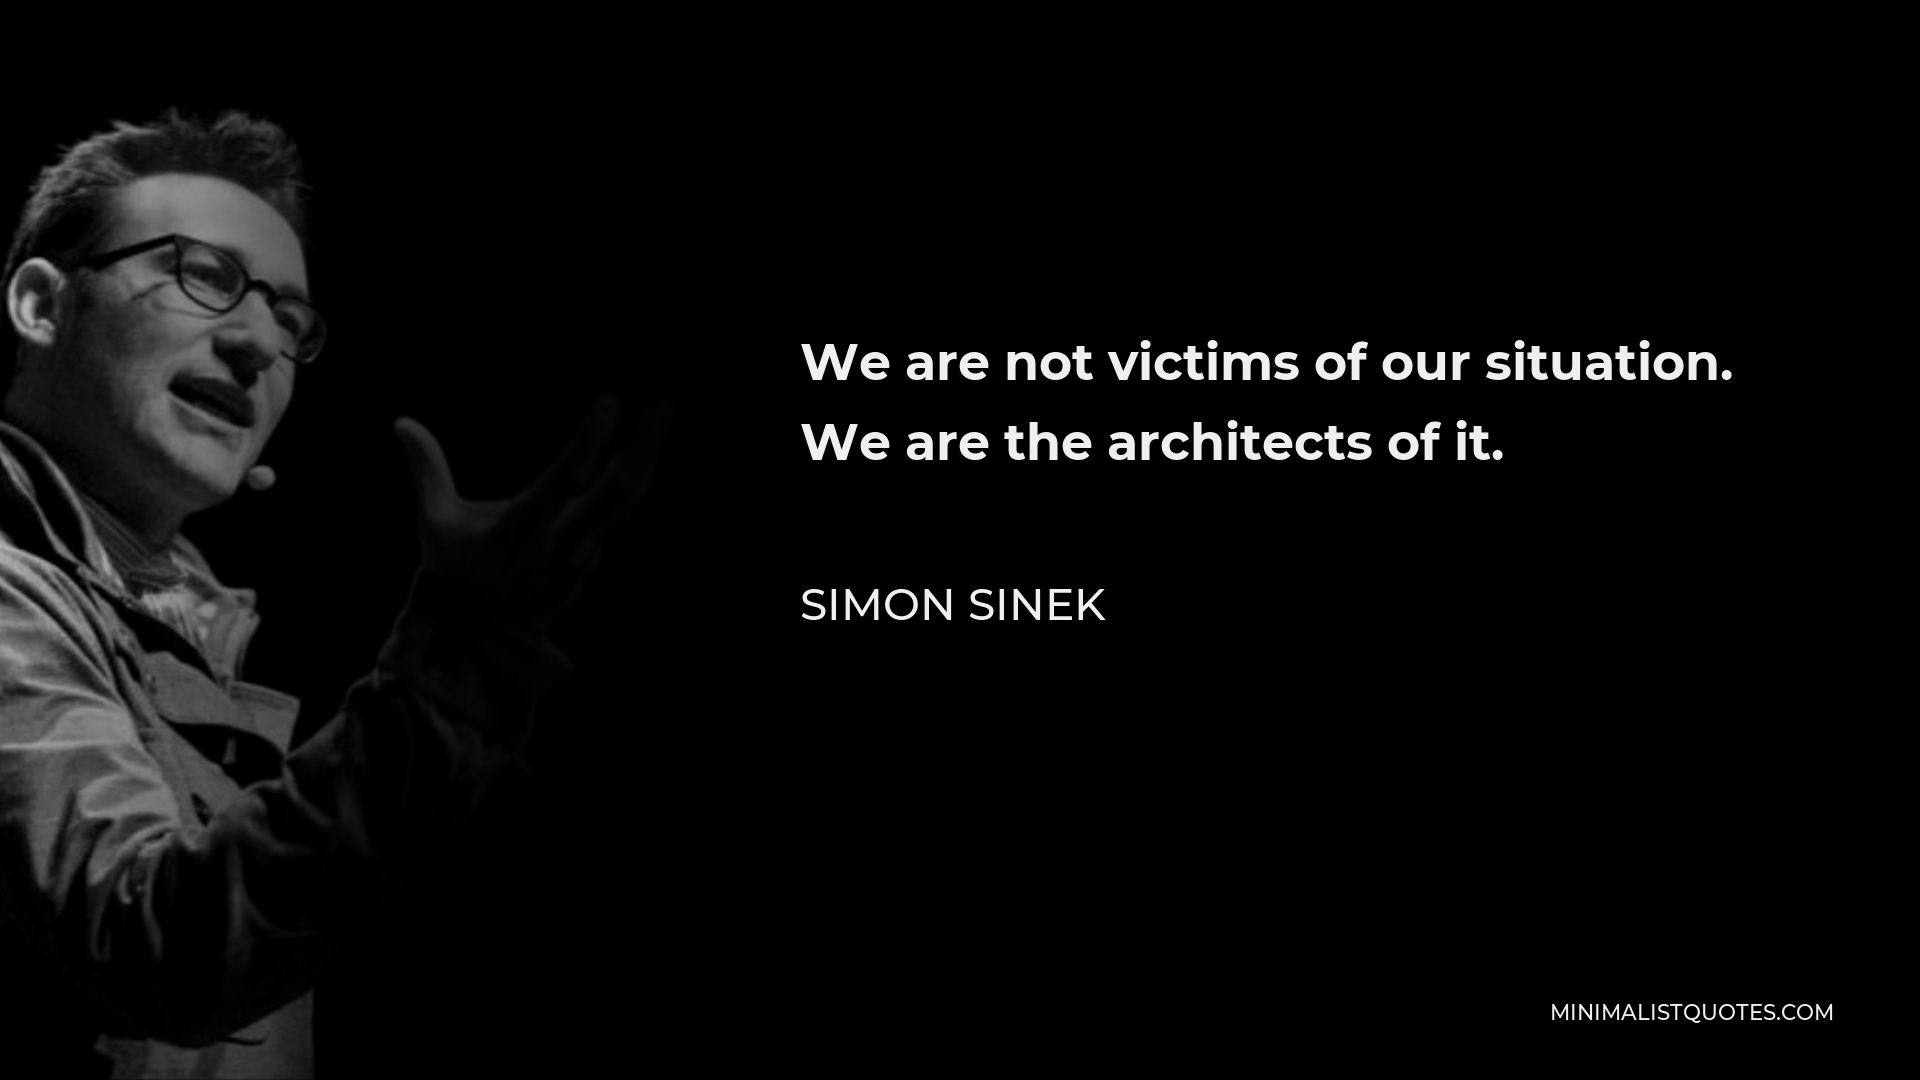 Simon Sinek Quote - We are not victims of our situation. We are the architects of it.